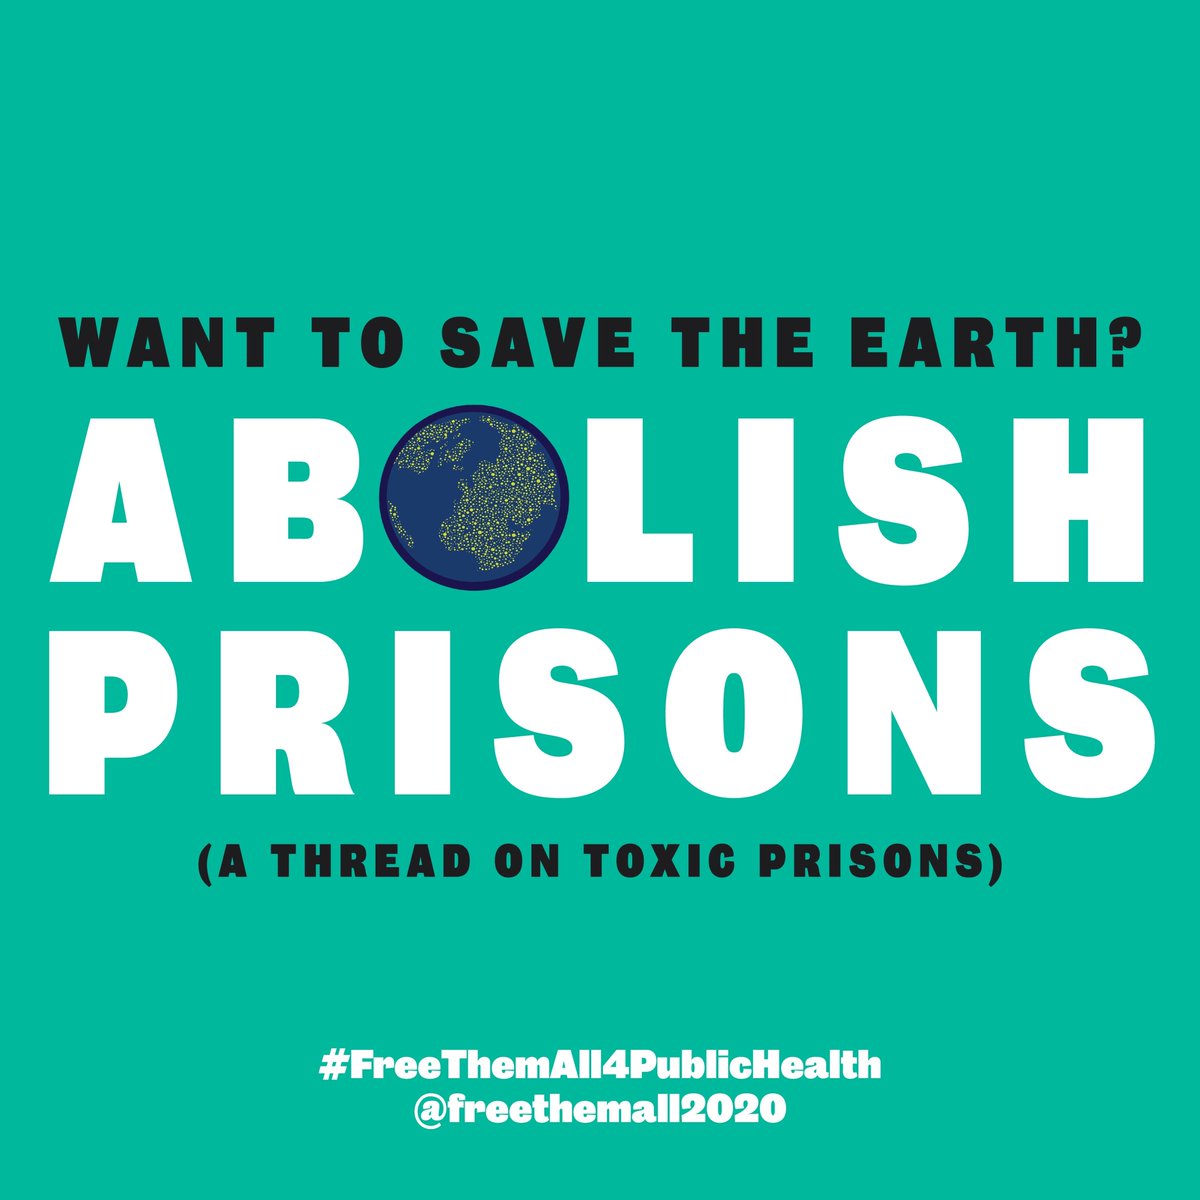 Want to save the earth? ABOLISH PRISONS  #EarthDay    #EarthDay2020    #FreeThemAll4PublicHealth [A thread on toxic prisons]